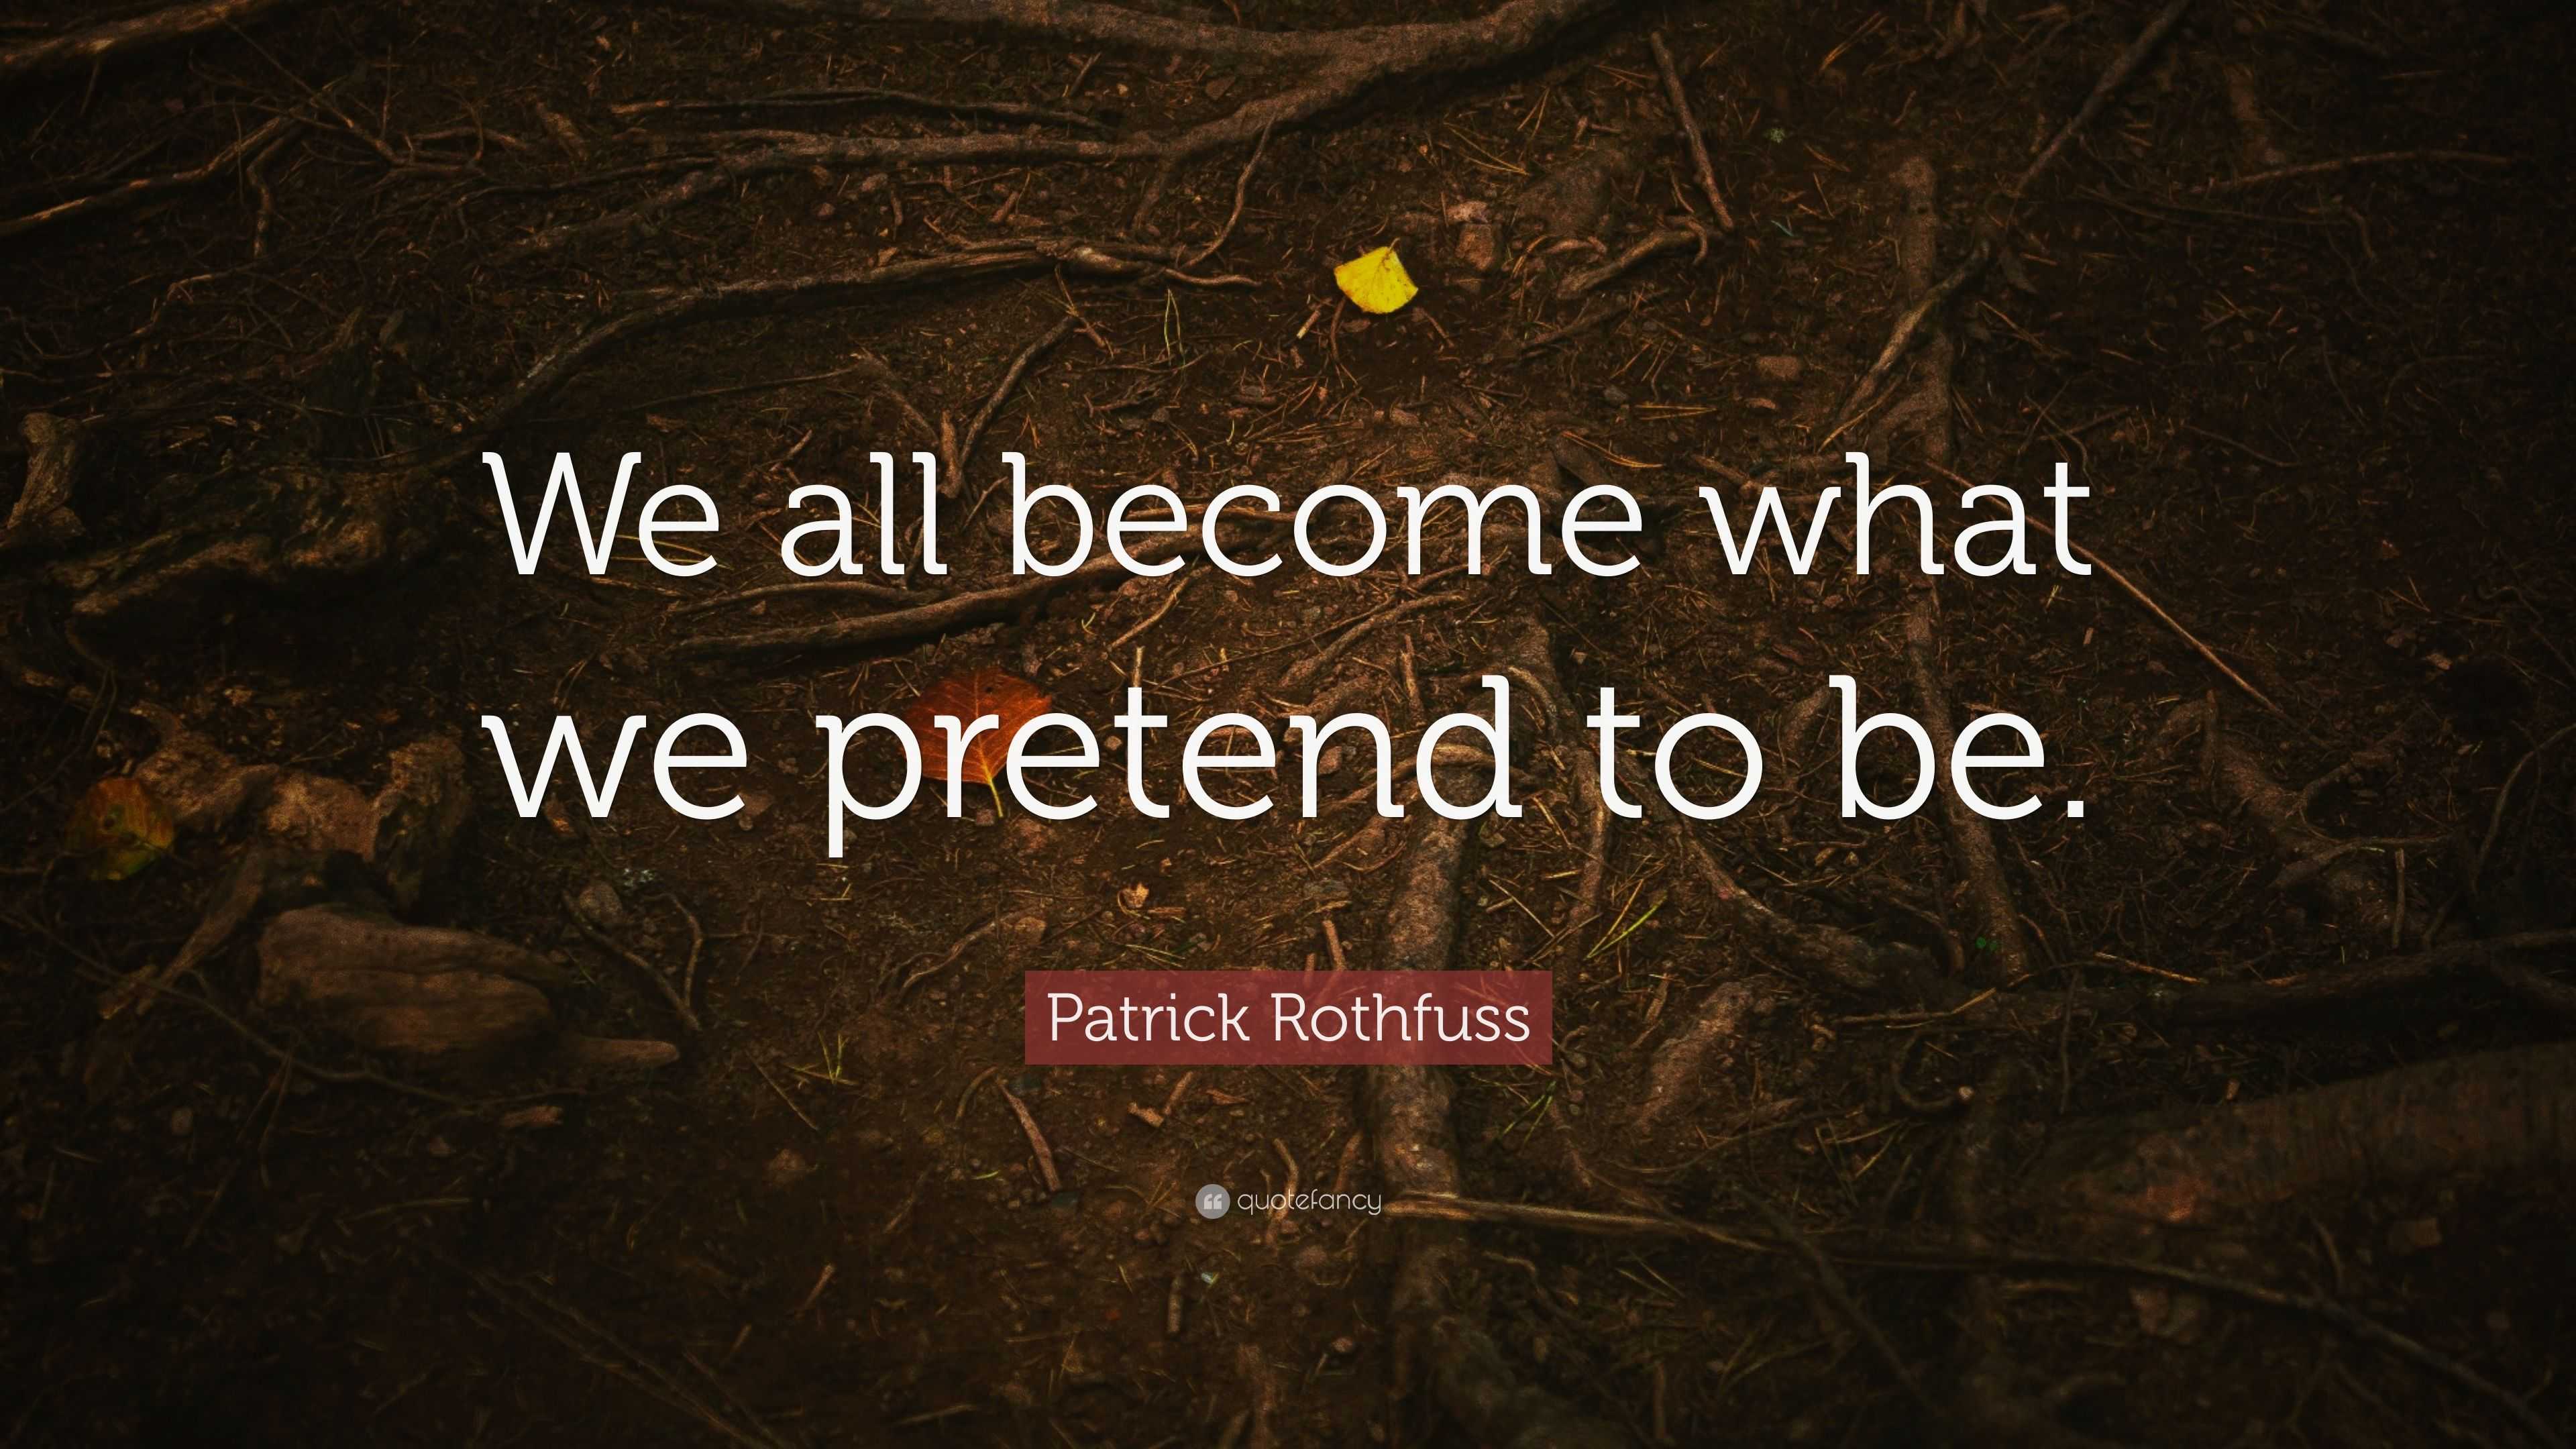 Patrick Rothfuss Quote: “We all become what we pretend to be.”